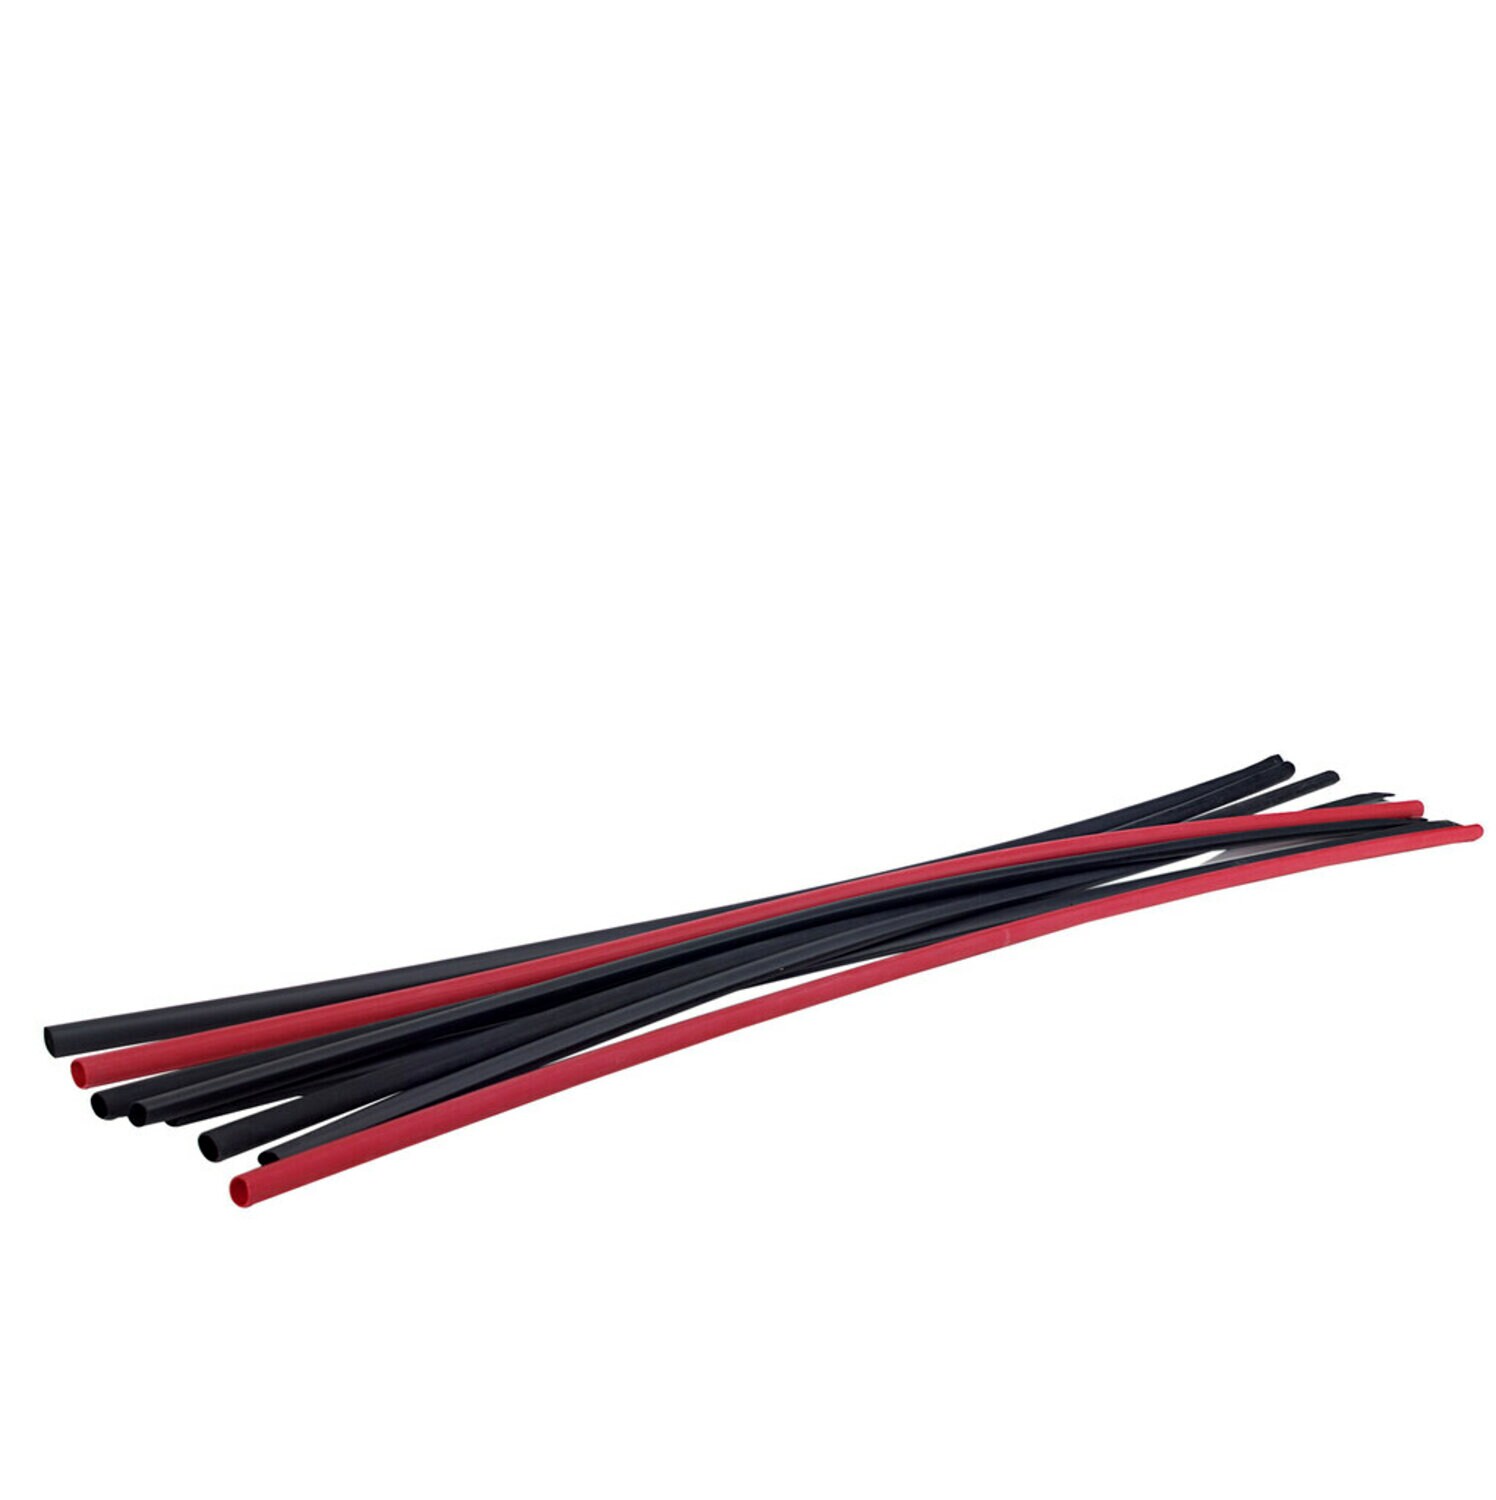 7000133543 - 3M Heat Shrink Thin-Wall Tubing FP-301-1/8-48"-Black-Hdr-25 Pcs, 48 in
Length sticks with header label, 25 pieces/case